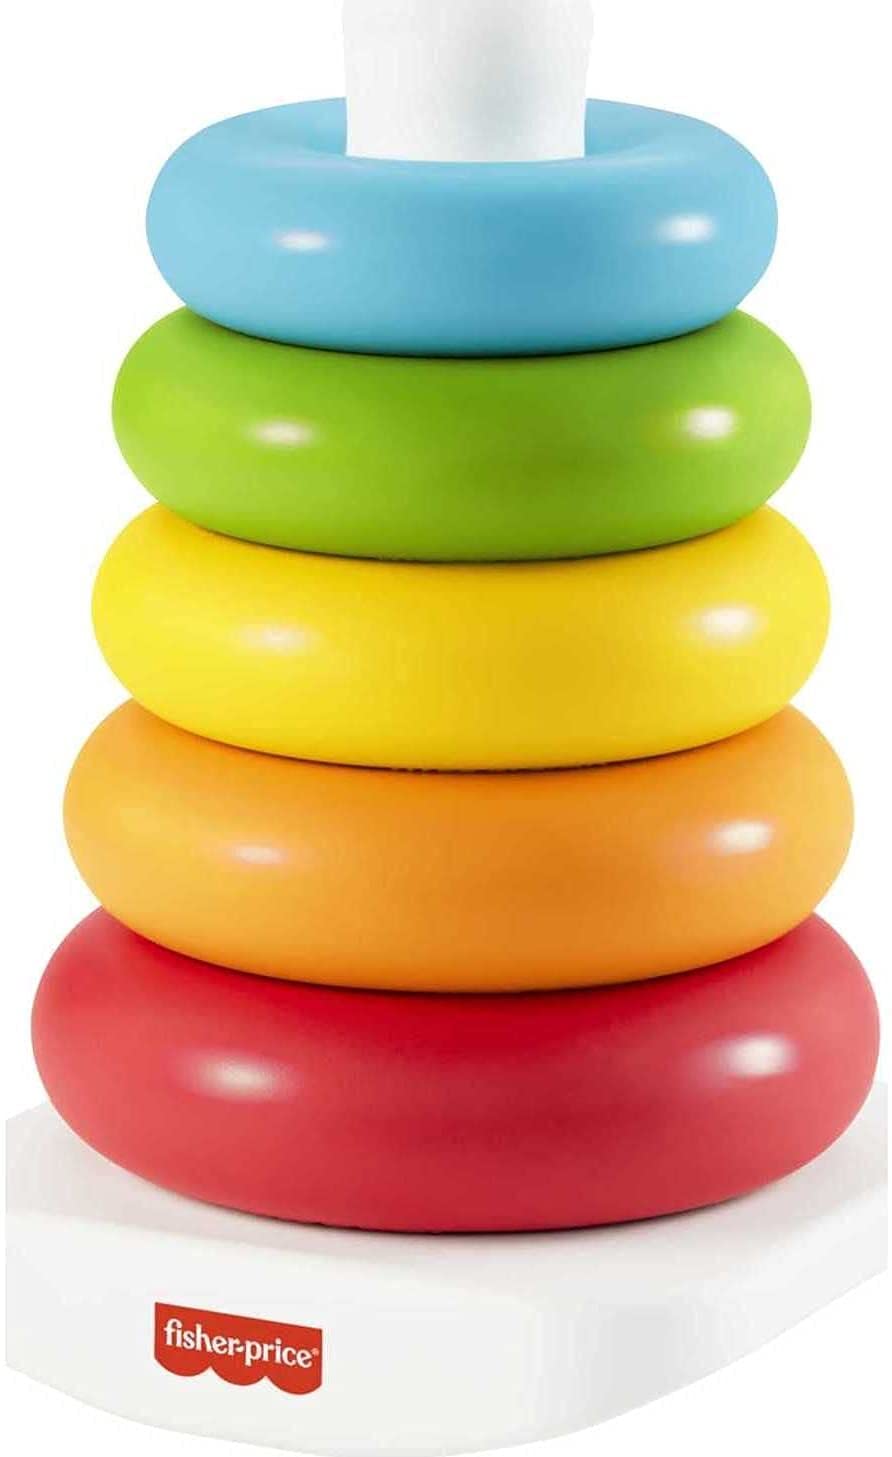 Fisher-Price Rock-a-Stack, Bat-at Ring-Stacking Toy for Infants Ages 6 Months and Older